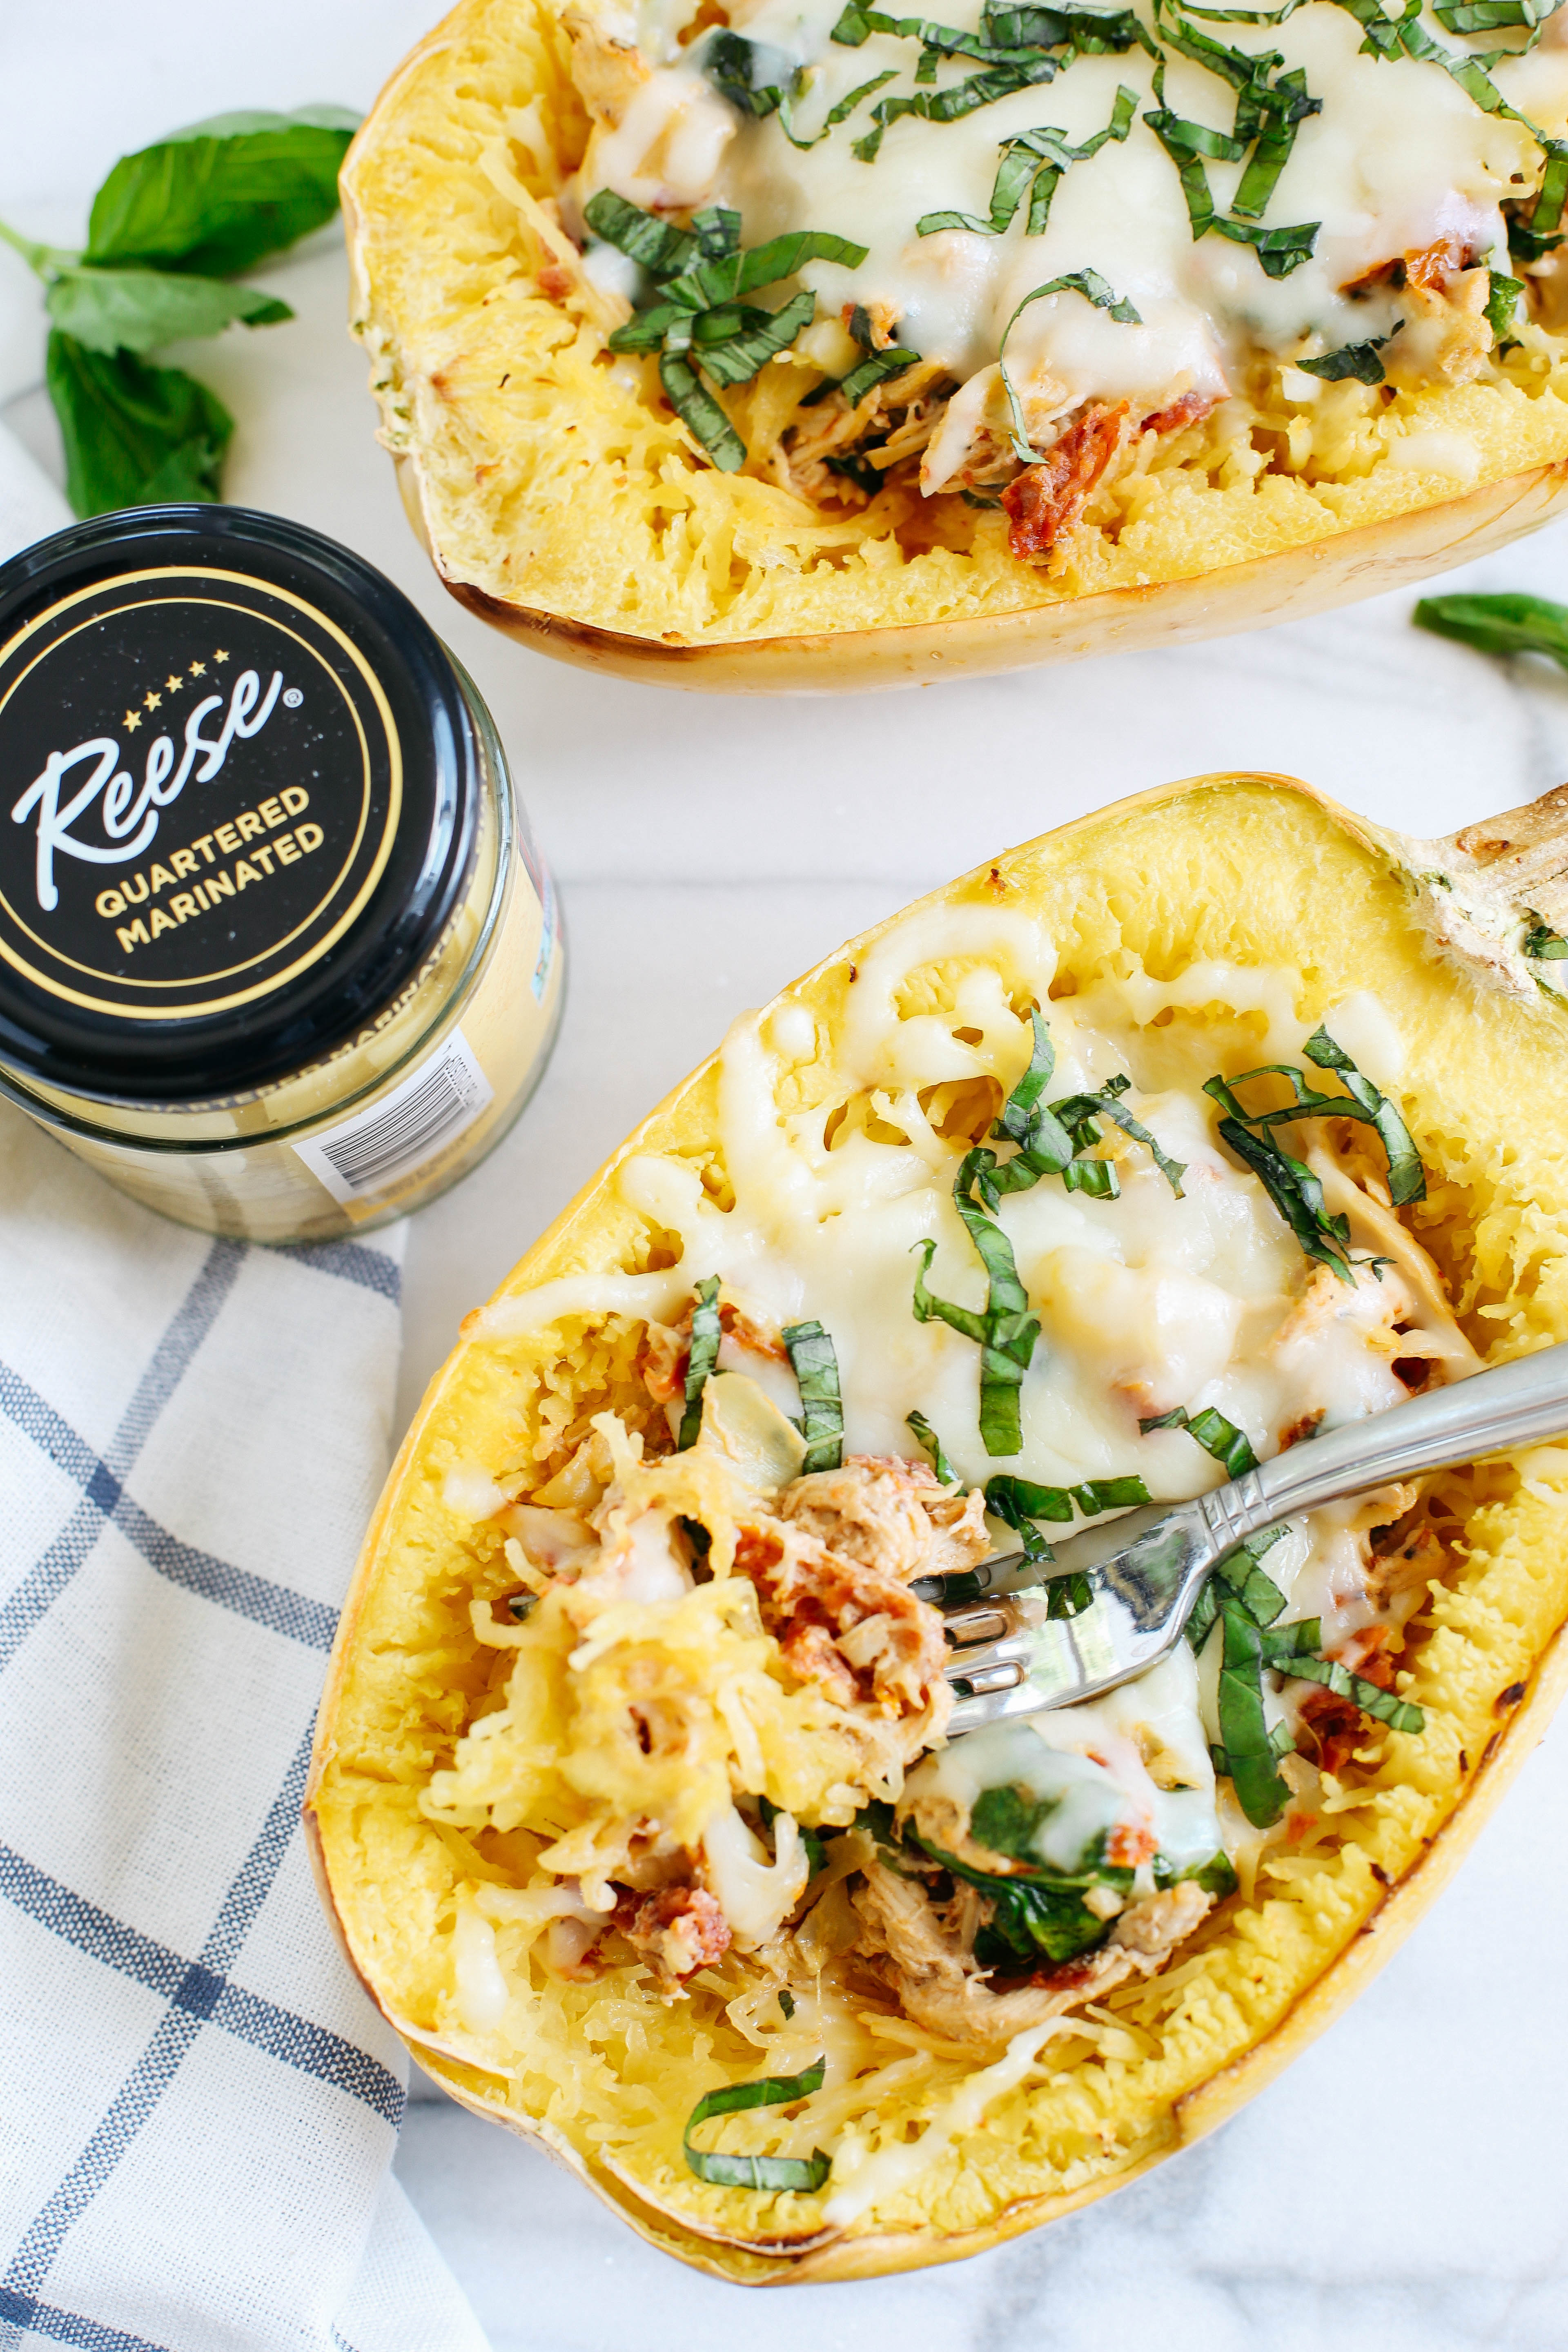 These Sun Dried Tomato and Artichoke Spaghetti Squash Boats are cheesy, delicious and make the perfect weeknight comfort meal that you can enjoy guilt-free! 